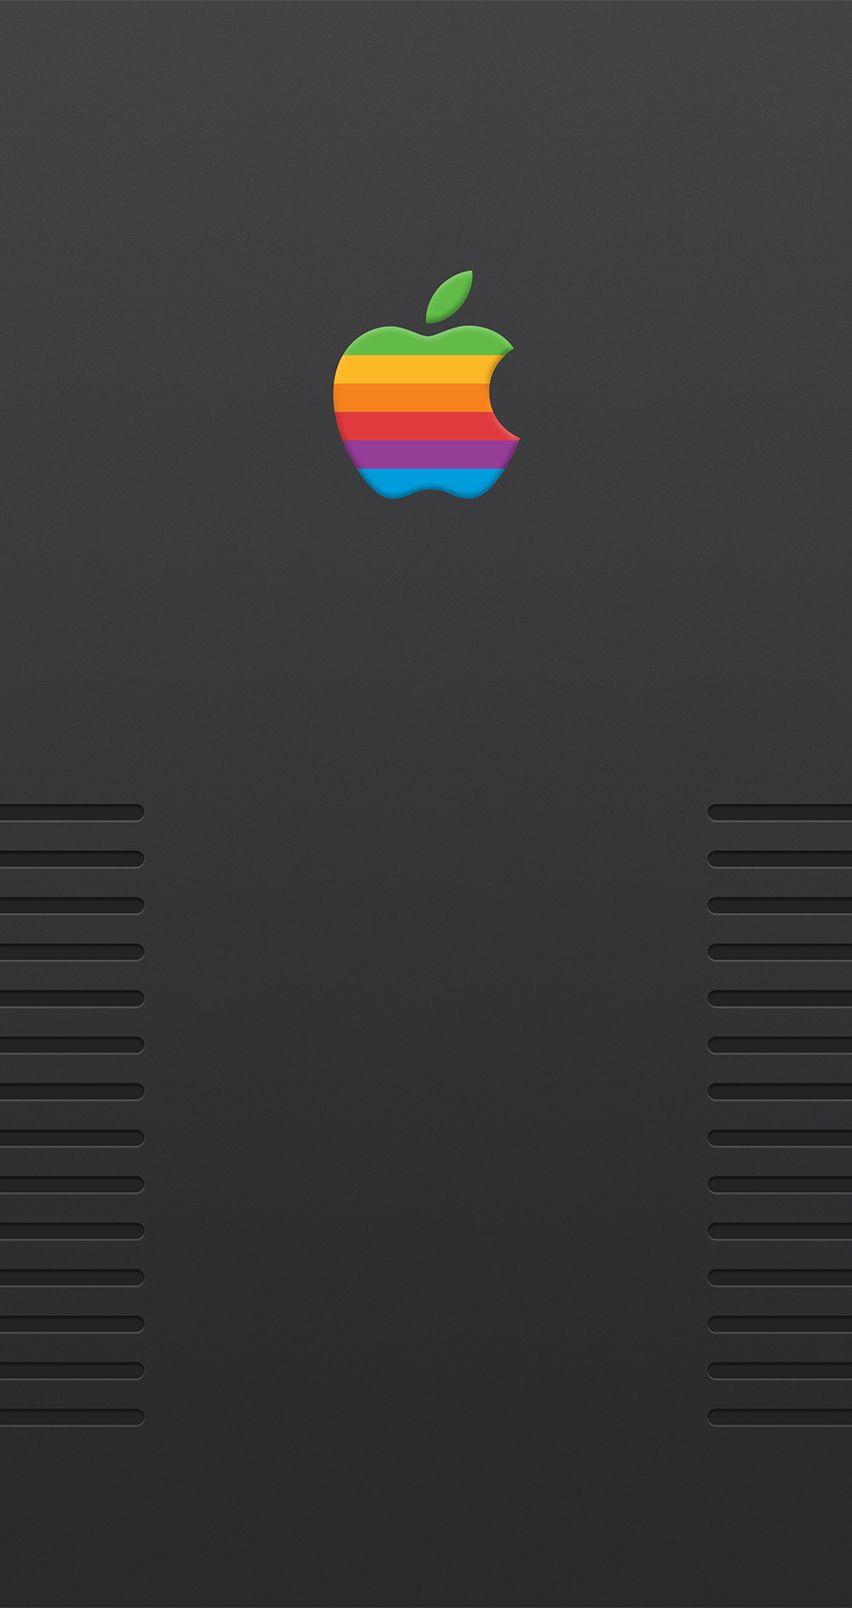 Wallpaper Weekends: Retro Apple for iPhone, iPad, Mac, and Apple